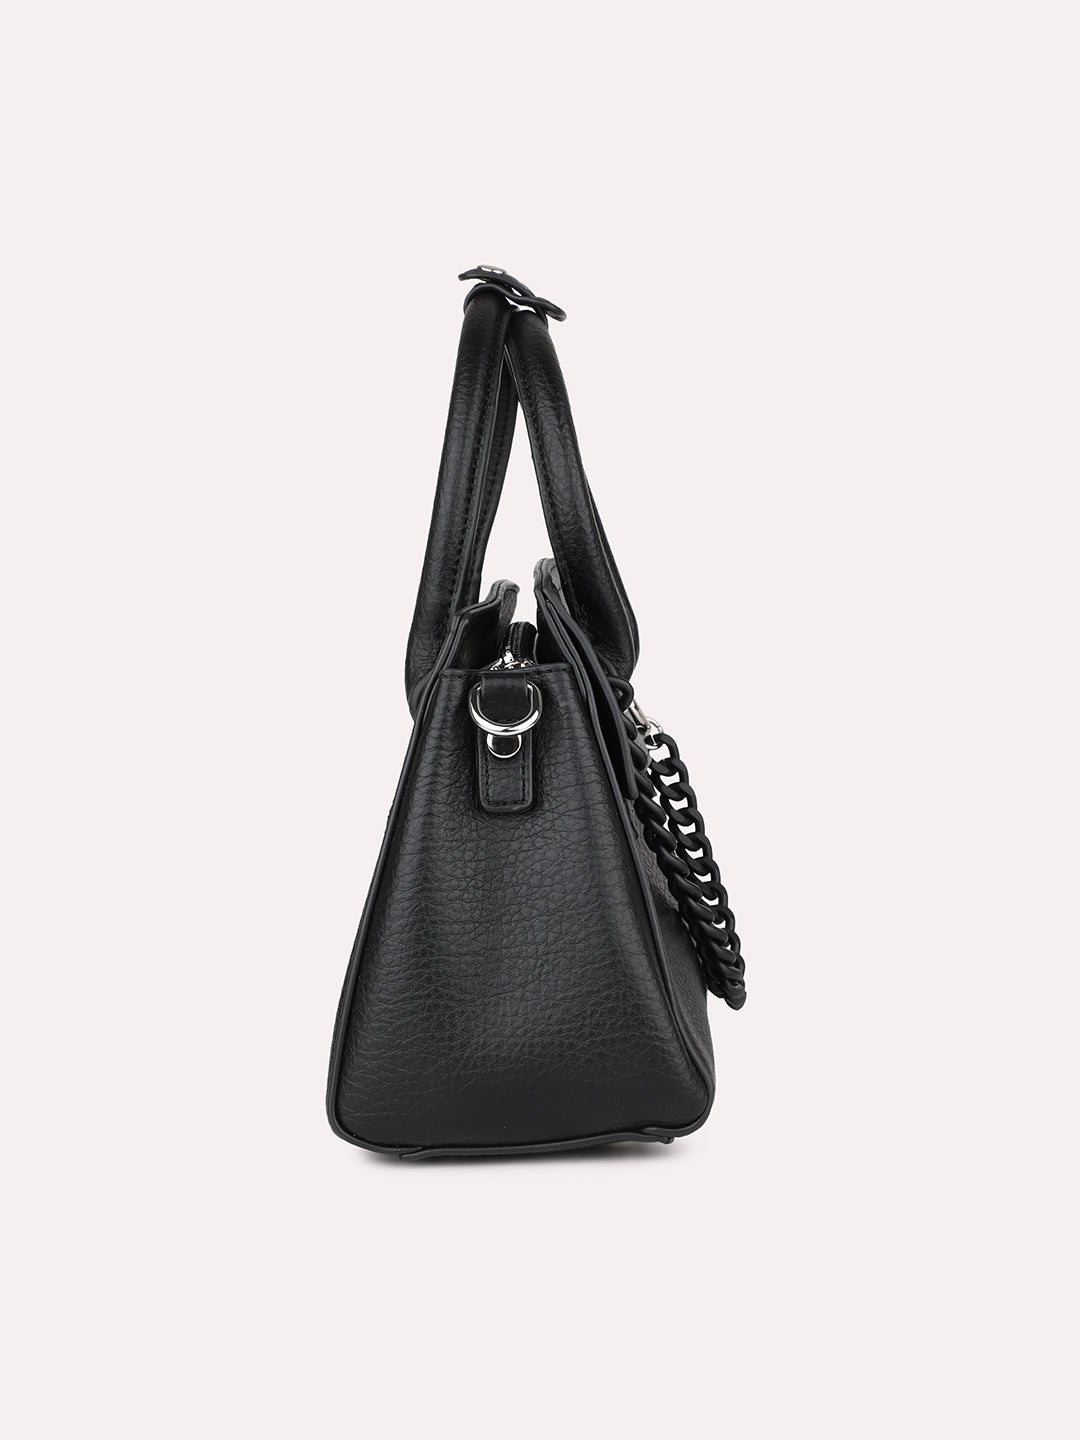 Women Black Solid Handheld Bag with Detachable Strap and Chain Detailing